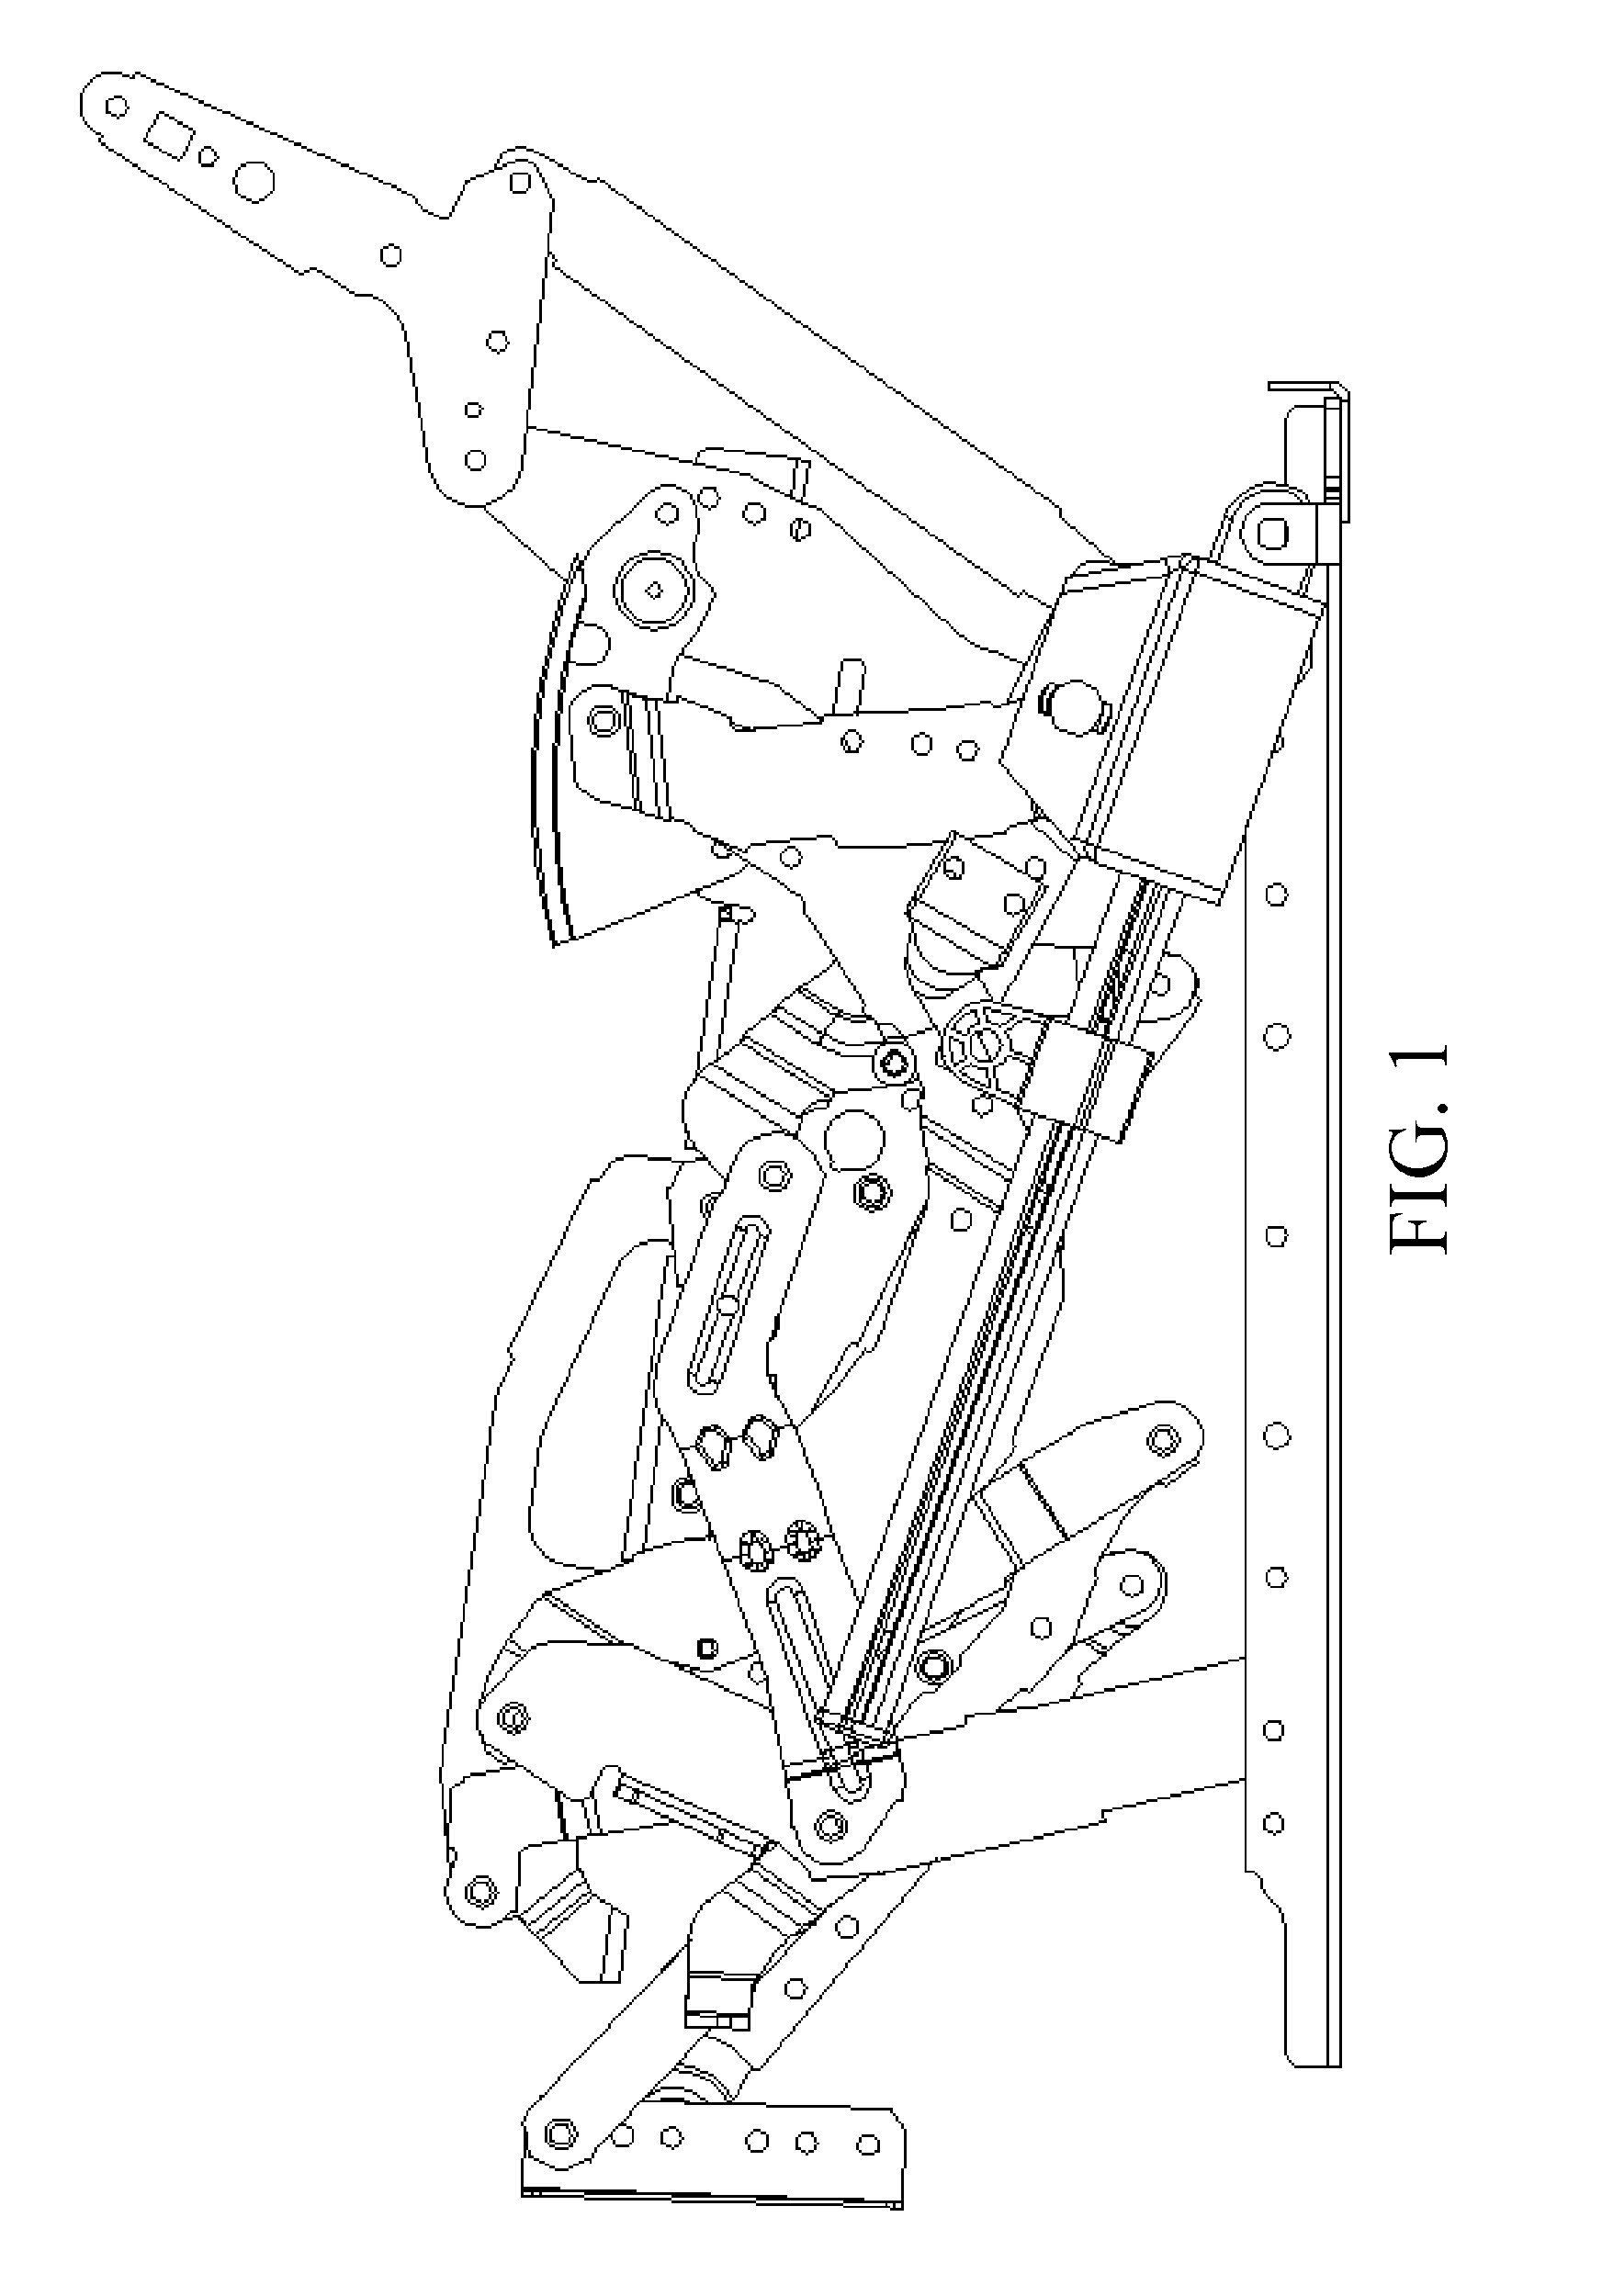 Electric and mechanical stretching apparatus for movable sofa